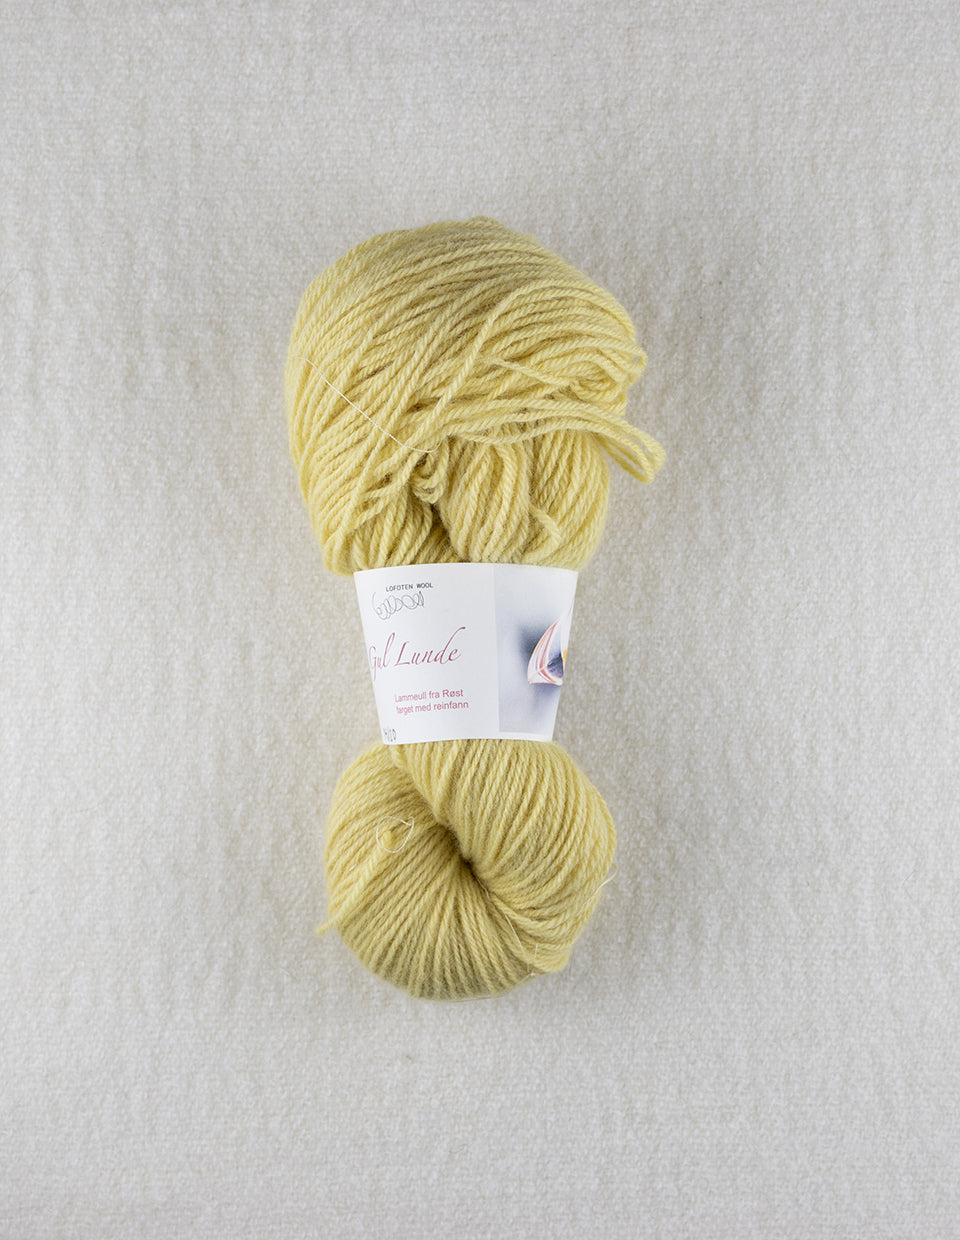 Markens Grøde (The Growth of the Field) 3 ply plant dyed knitting kit